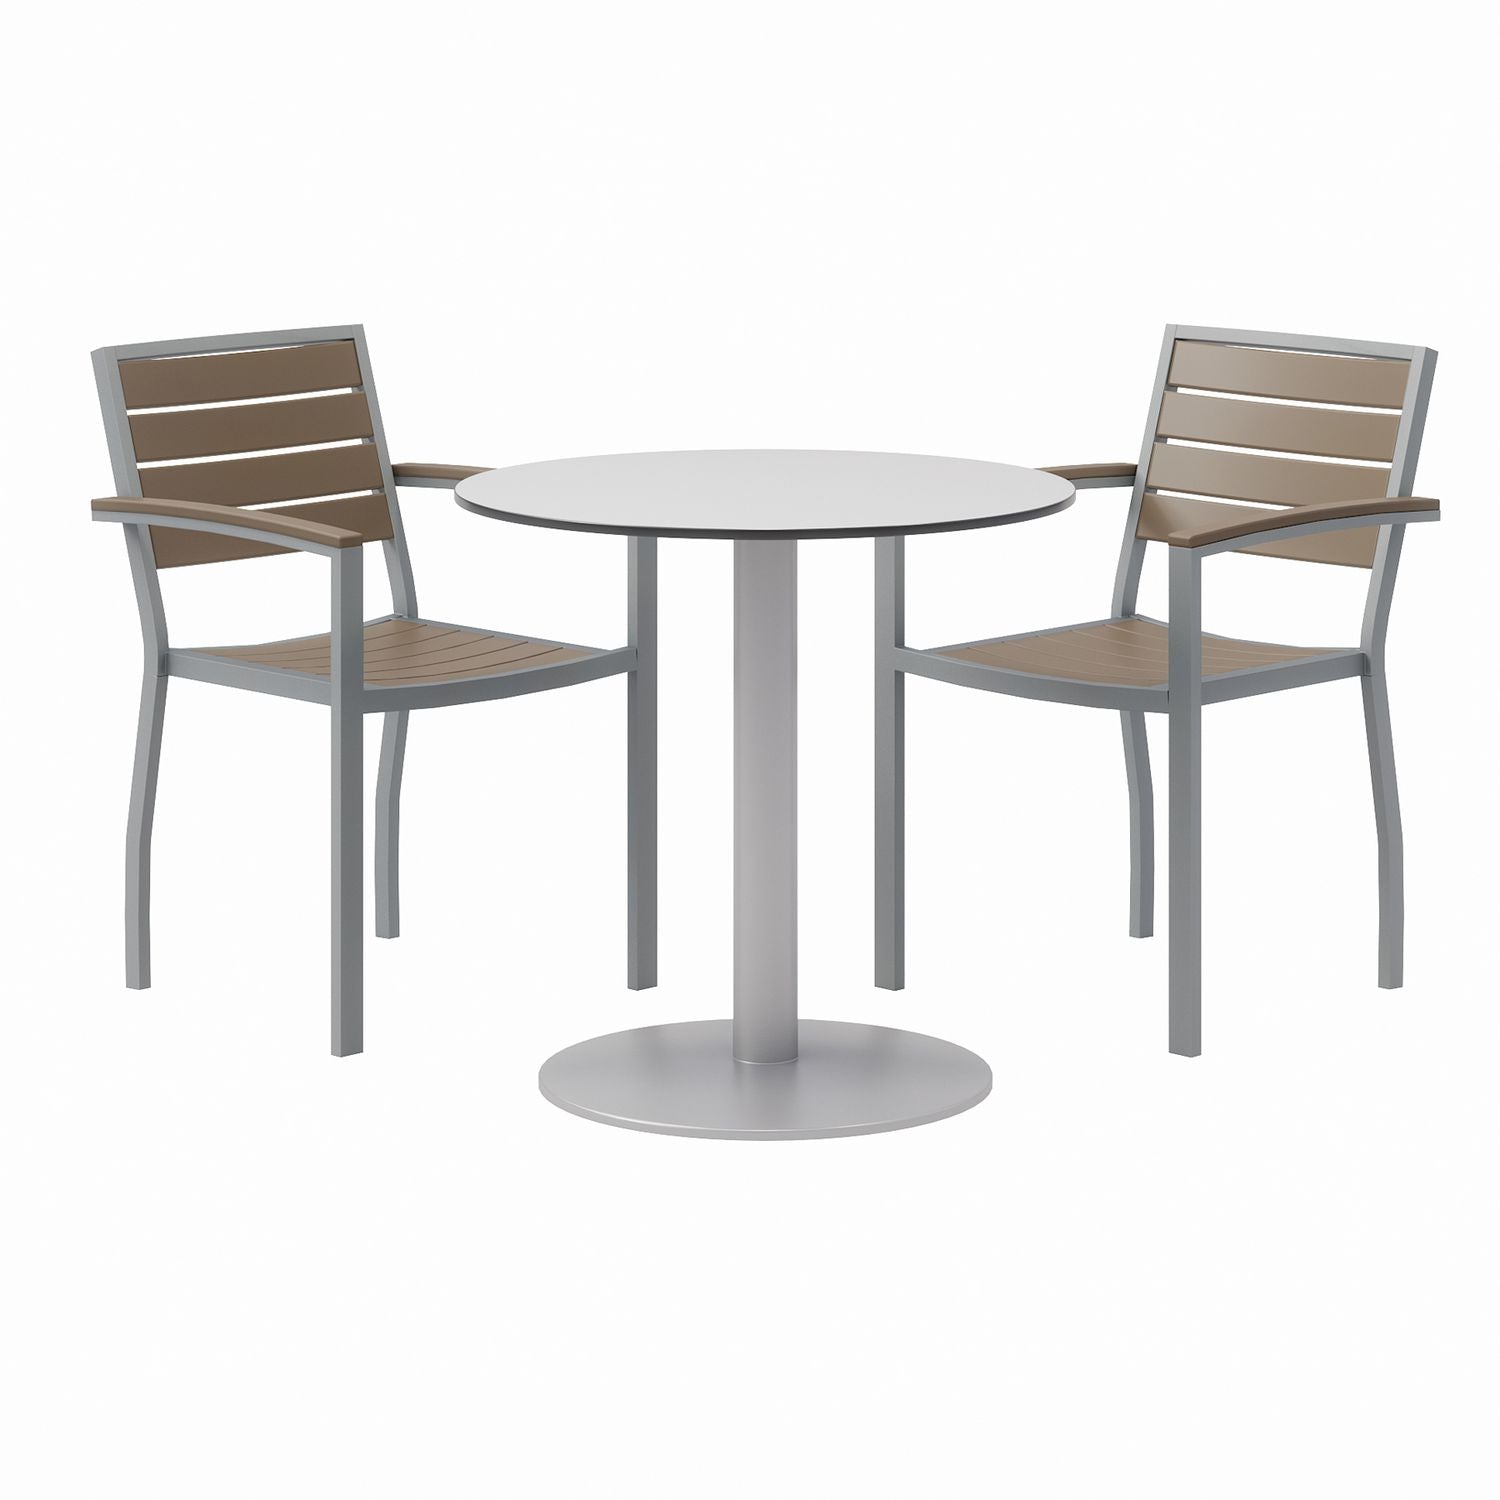 eveleen-outdoor-patio-table-with-two-mocha-powder-coated-polymer-chairs-30-dia-x-29h-gray-ships-in-4-6-business-days_kfi840031918444 - 1